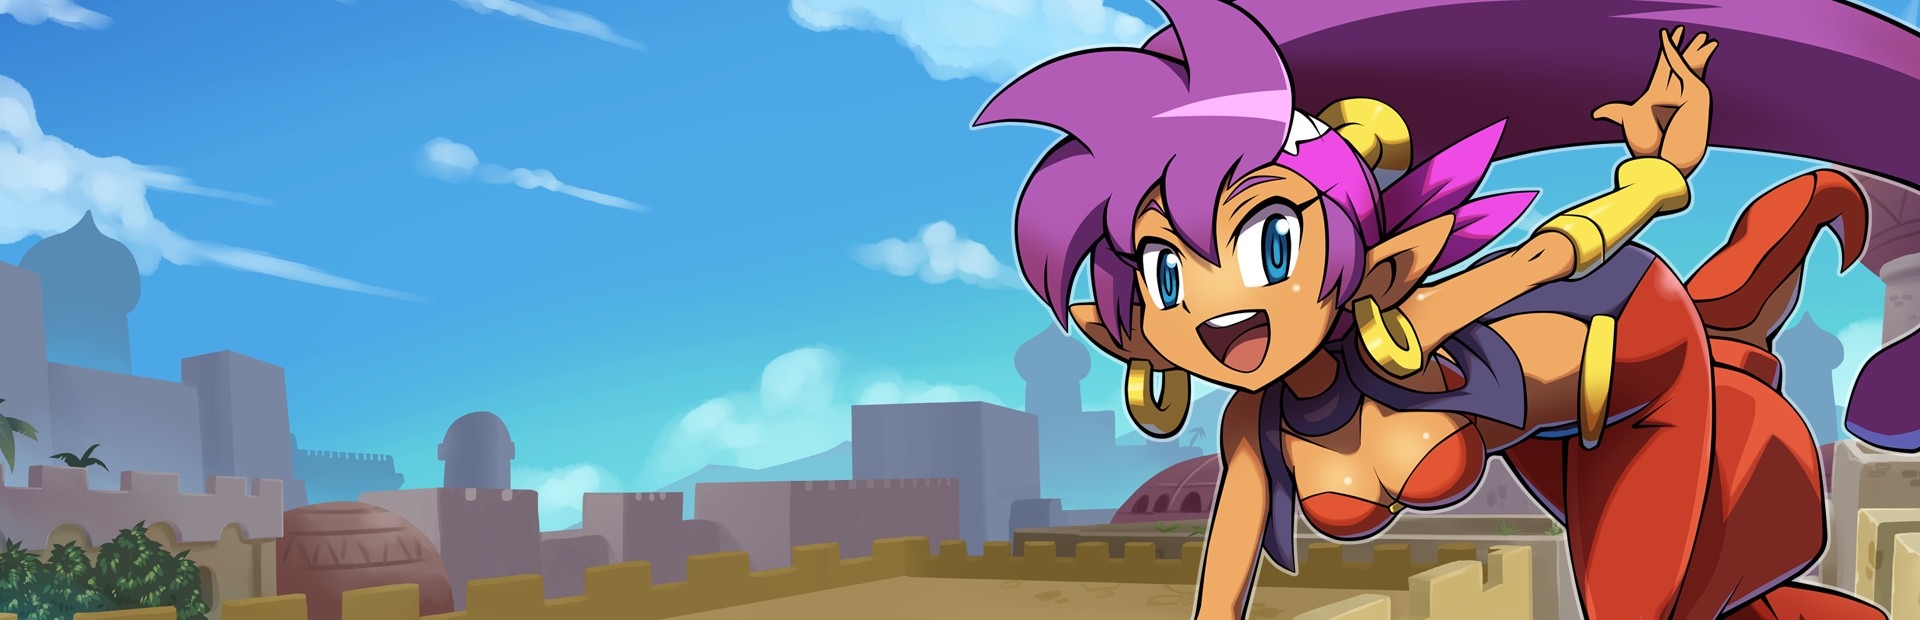 Banner Shantae and the Pirate's Curse